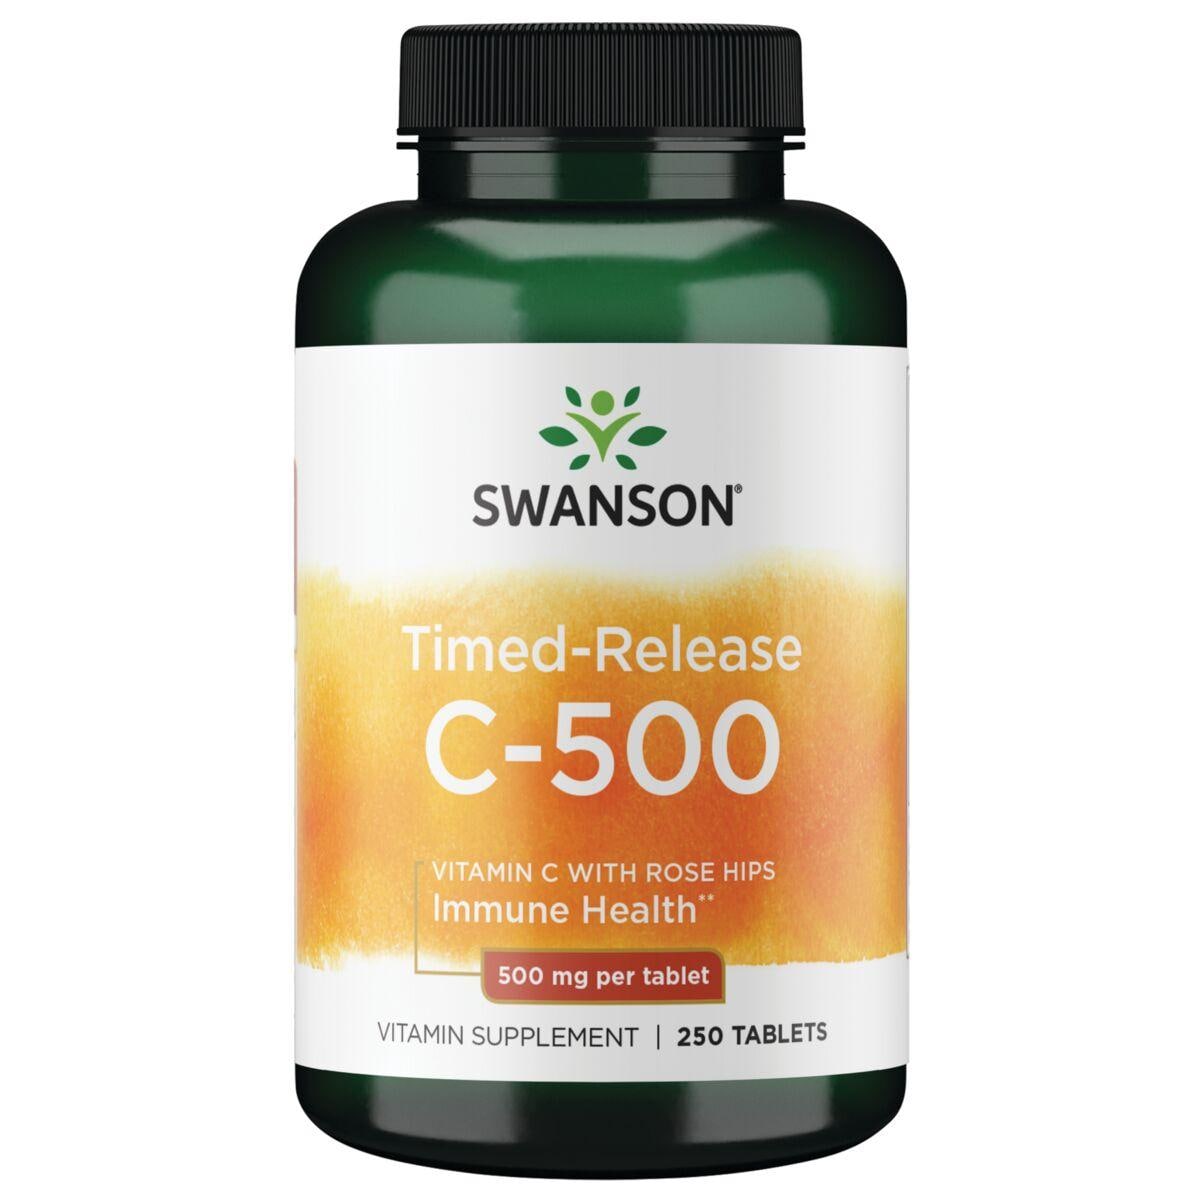 Swanson Premium Time-Released C-500 with Rose Hips Vitamin | 500 mg | 250 Tabs | Vitamin C